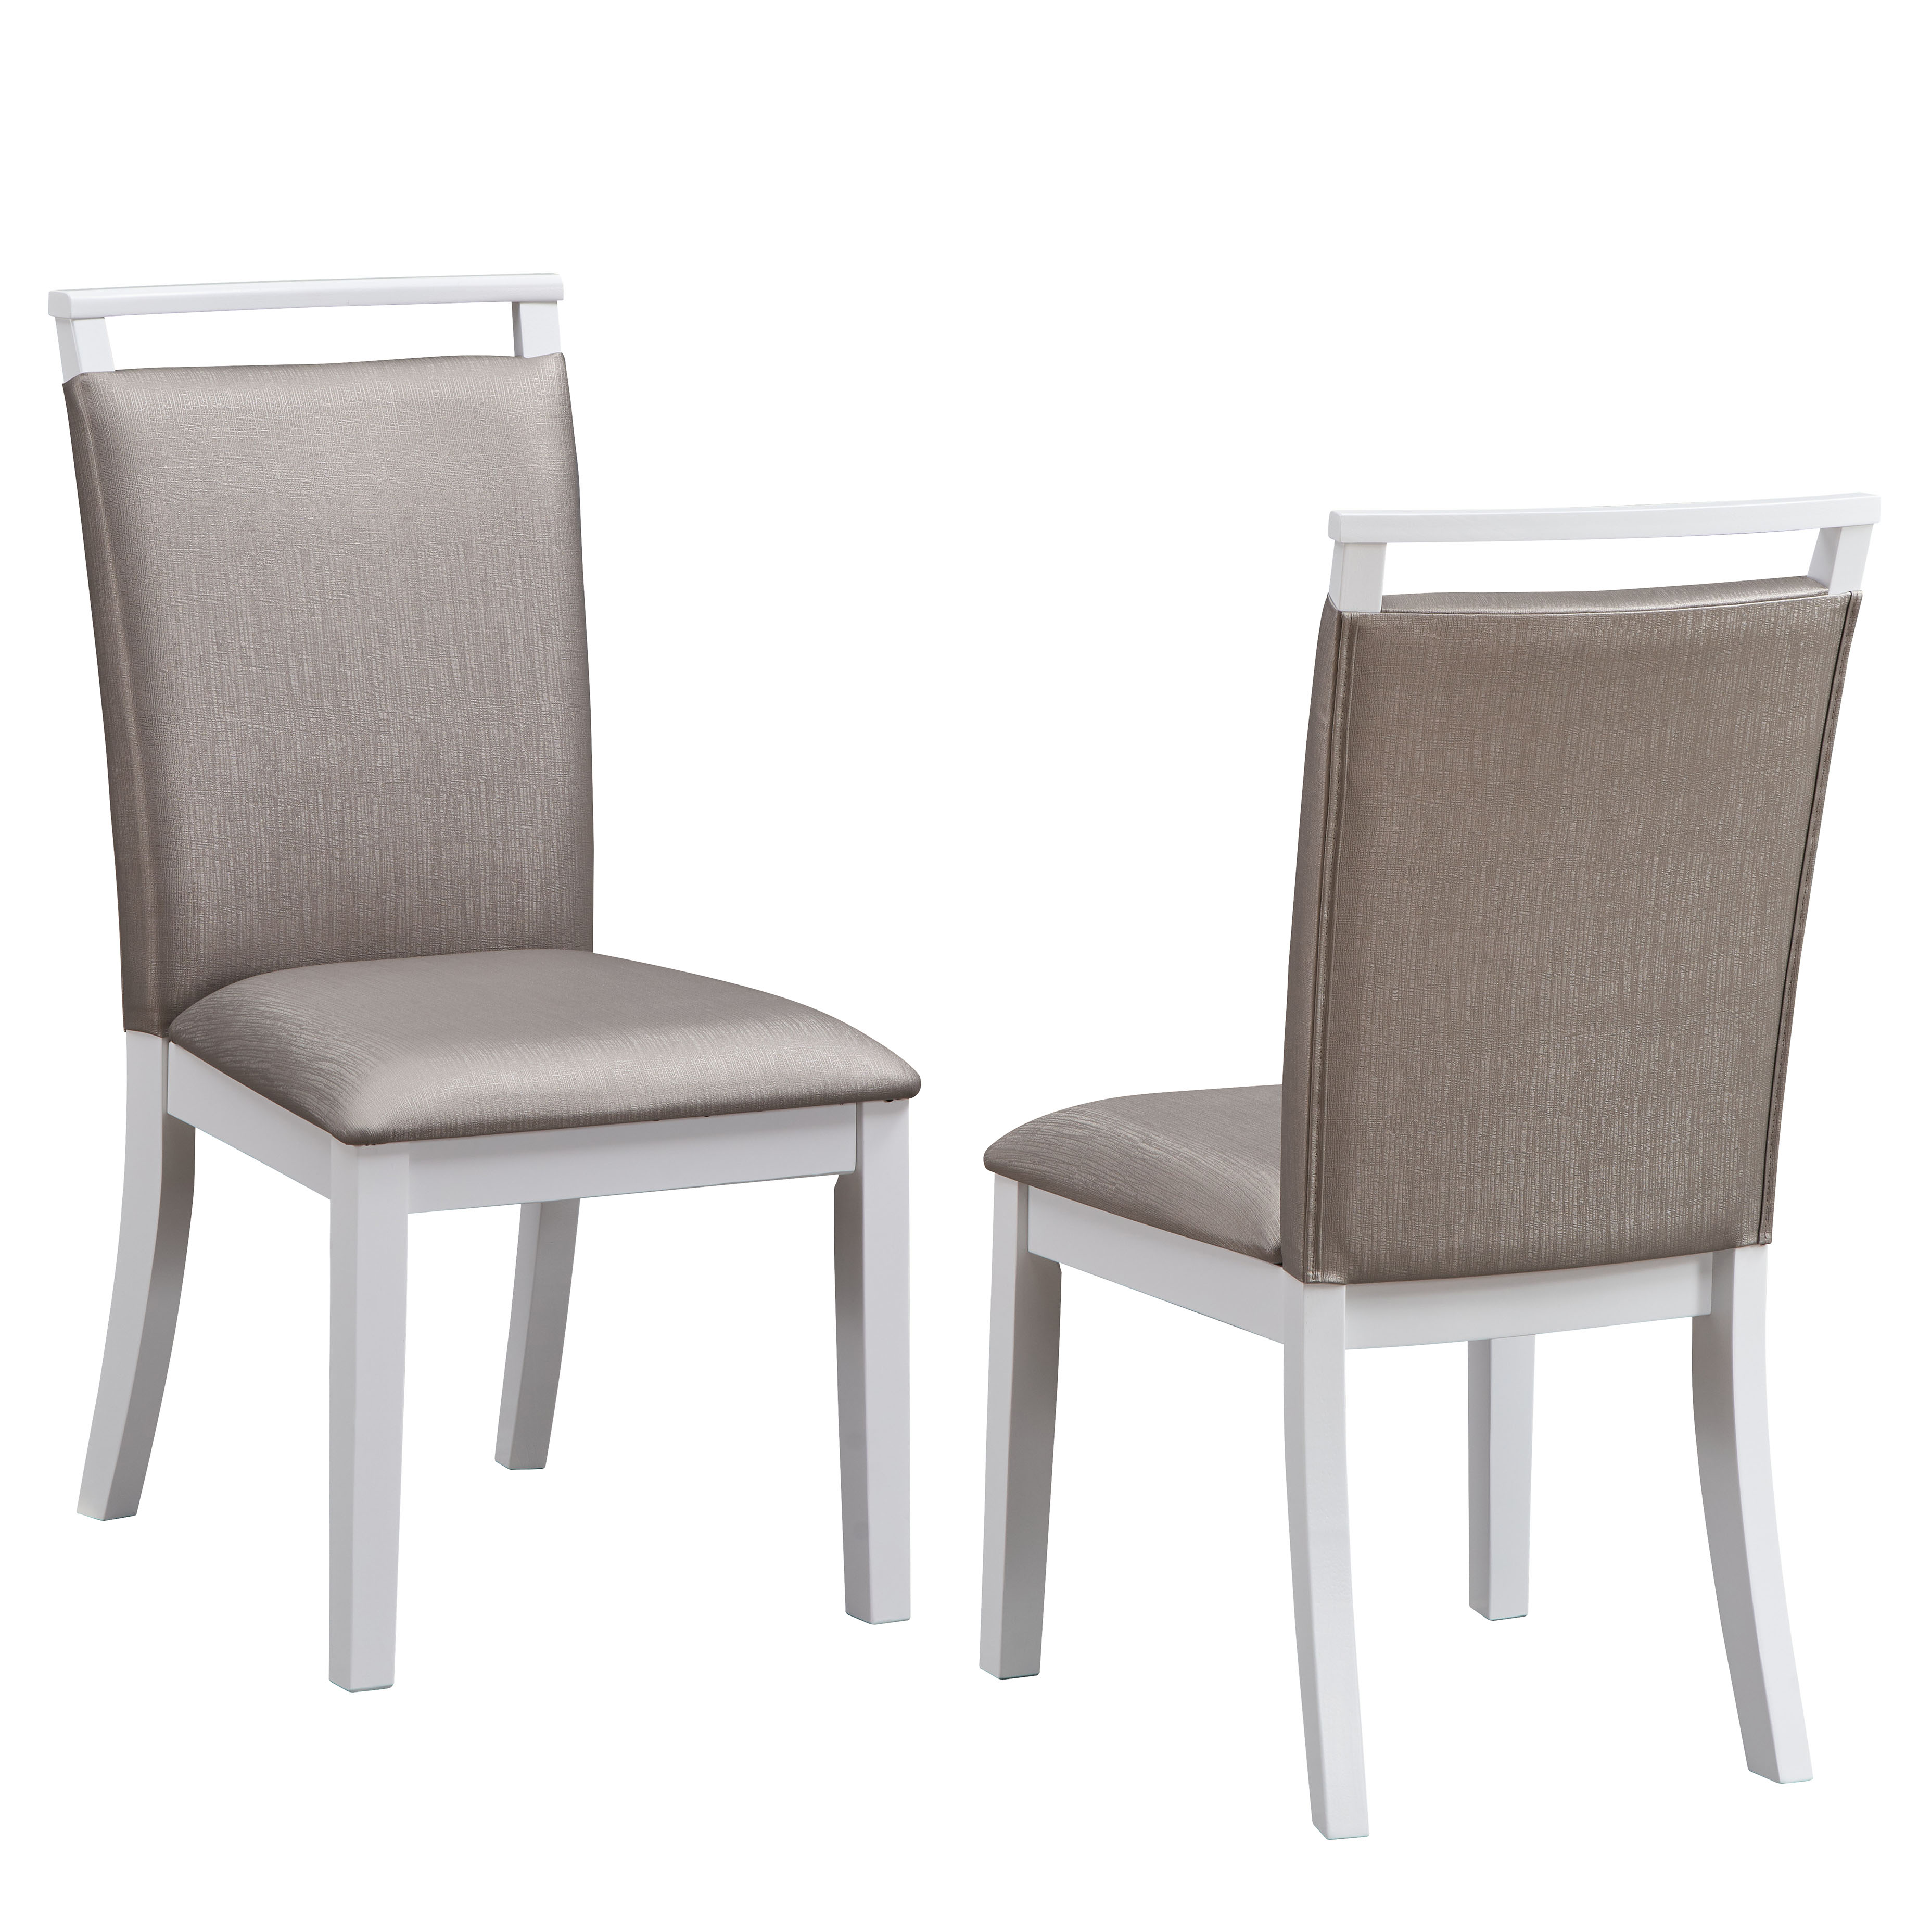 Austin Dining Chairs - Set of 2 (White)